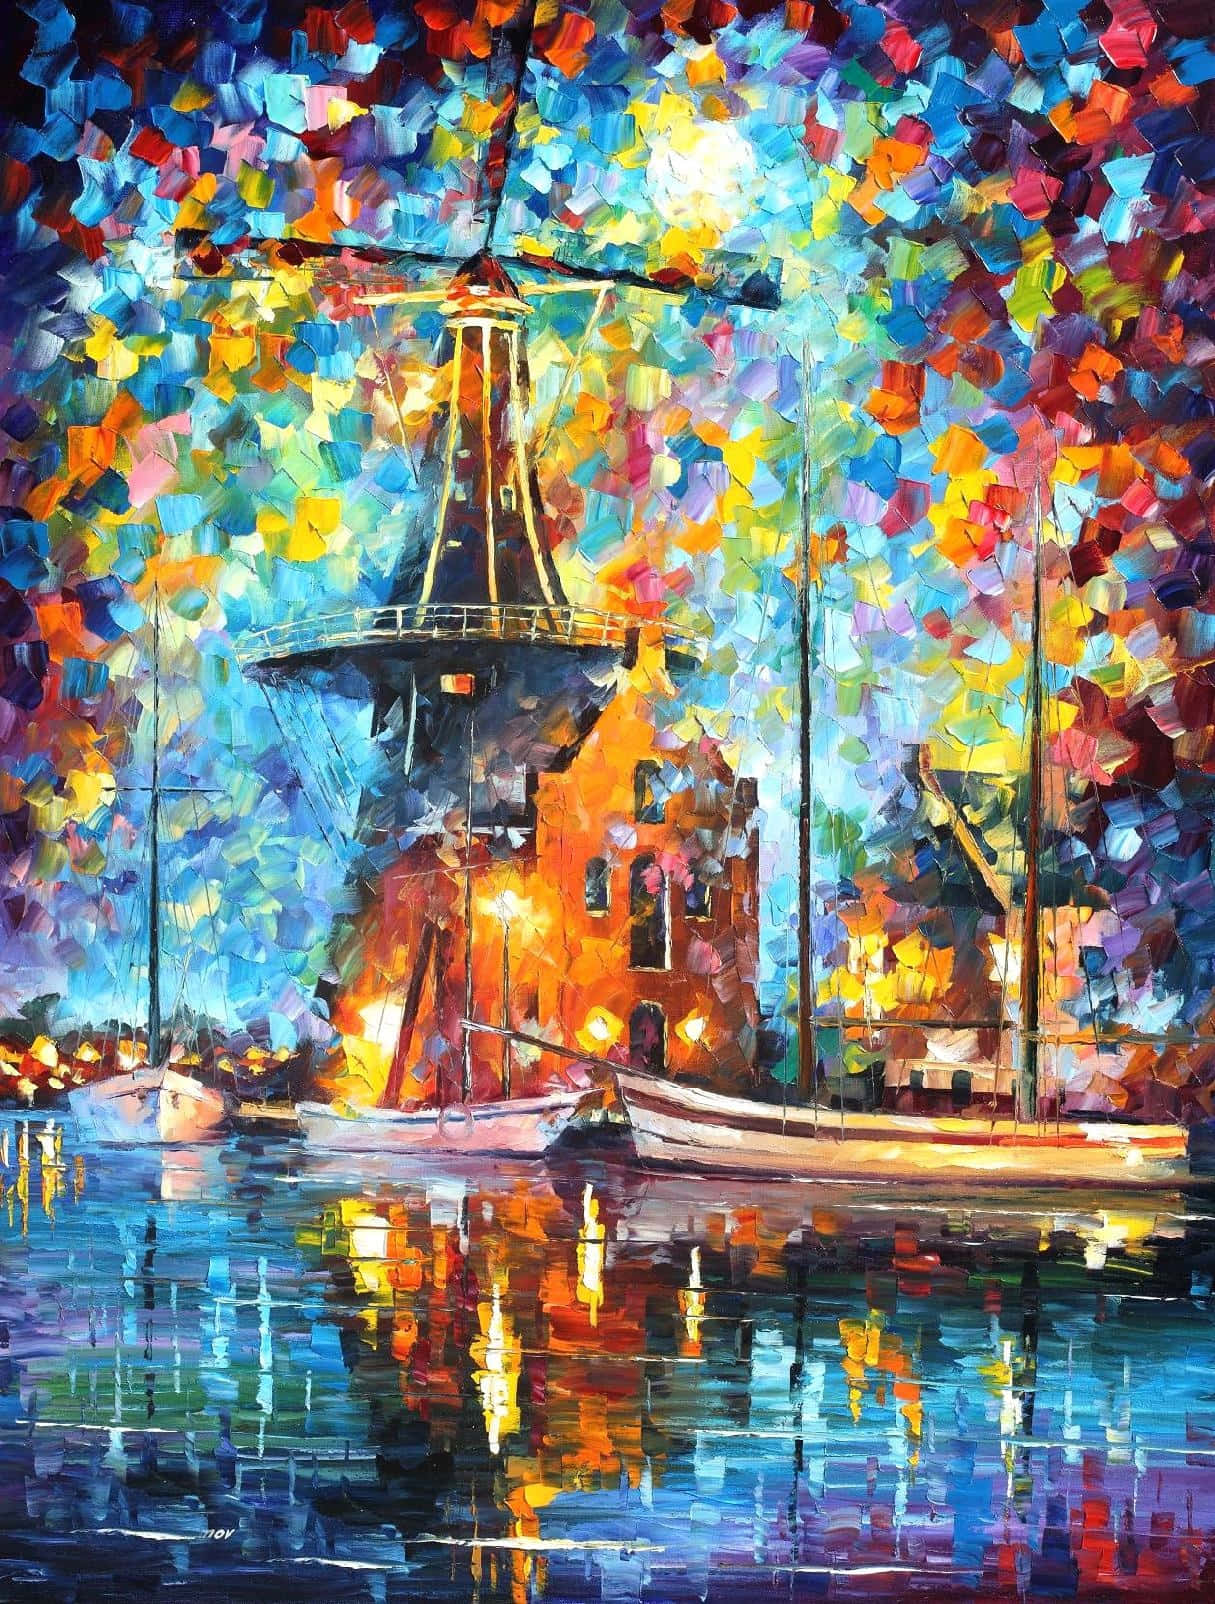 A Painting Of A Windmill And Boats In The Water